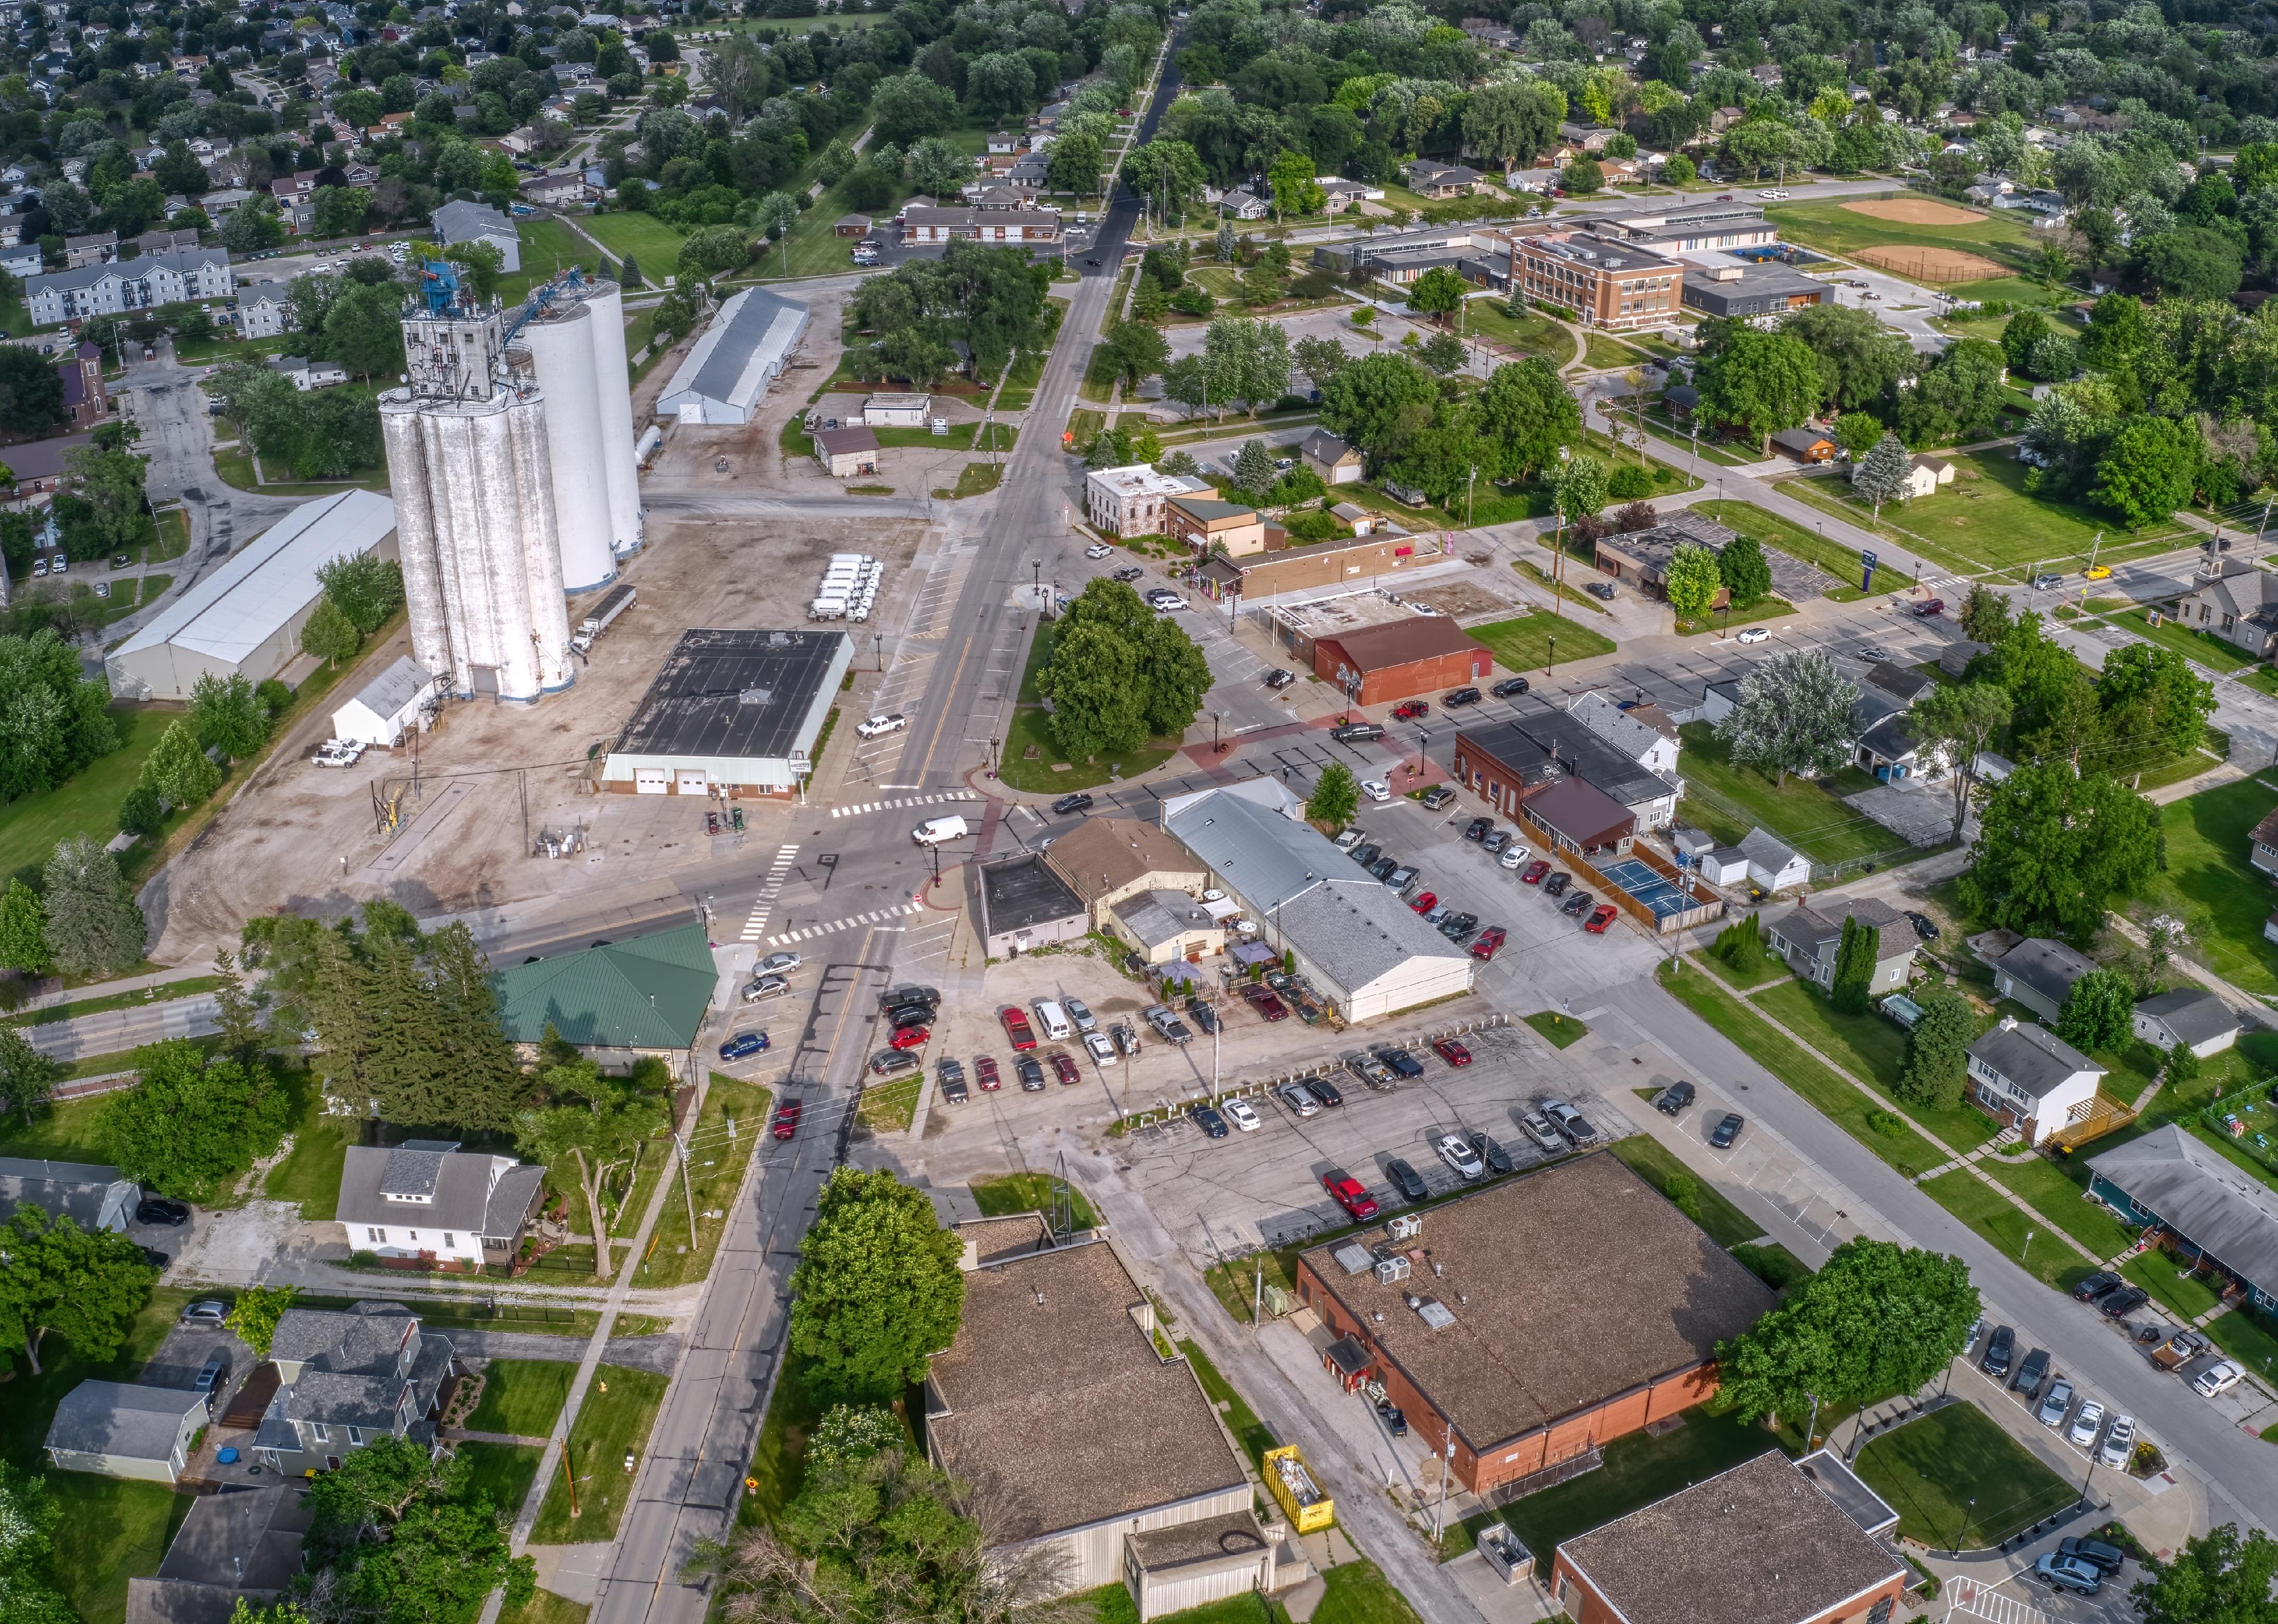 Aerial View of the Downtown Center of Waukee, Iowa during Summer.